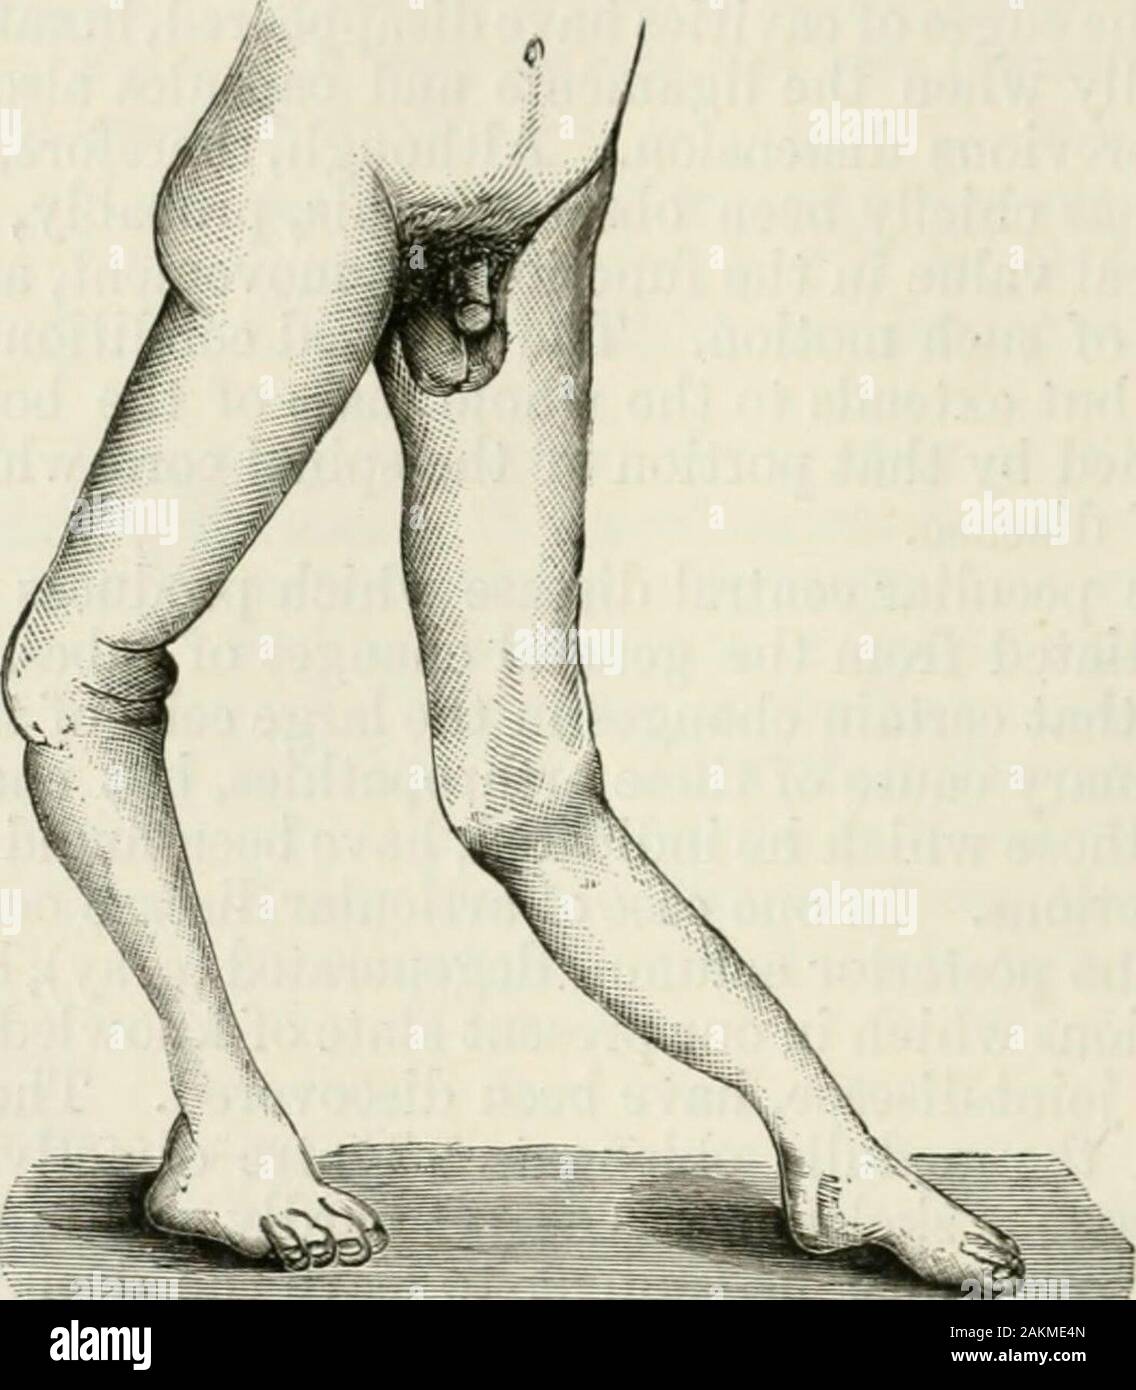 The international encyclopaedia of surgery; a systematic treatise on the theory and practice of surgery . od of ataxia, the patient * Buzzard, Pathological Transactions, vol. xxxi. p. 2G8. Qaz. des Hopitaux. Loc. cit. 428 DISEASES OF THE JOINTS, awakes with a limb greatly swollen, the enlargement being most marked ona level with the joint, where also it is most clearly aidematous or fluctuathig ;the ncighbtn-iiig parts are more brawny, and only pit on prolonged pressurewith the tinger. The tumefaction, although some exceptions to this rule occur, is absolutelywithout pain, redness, or other in Stock Photo